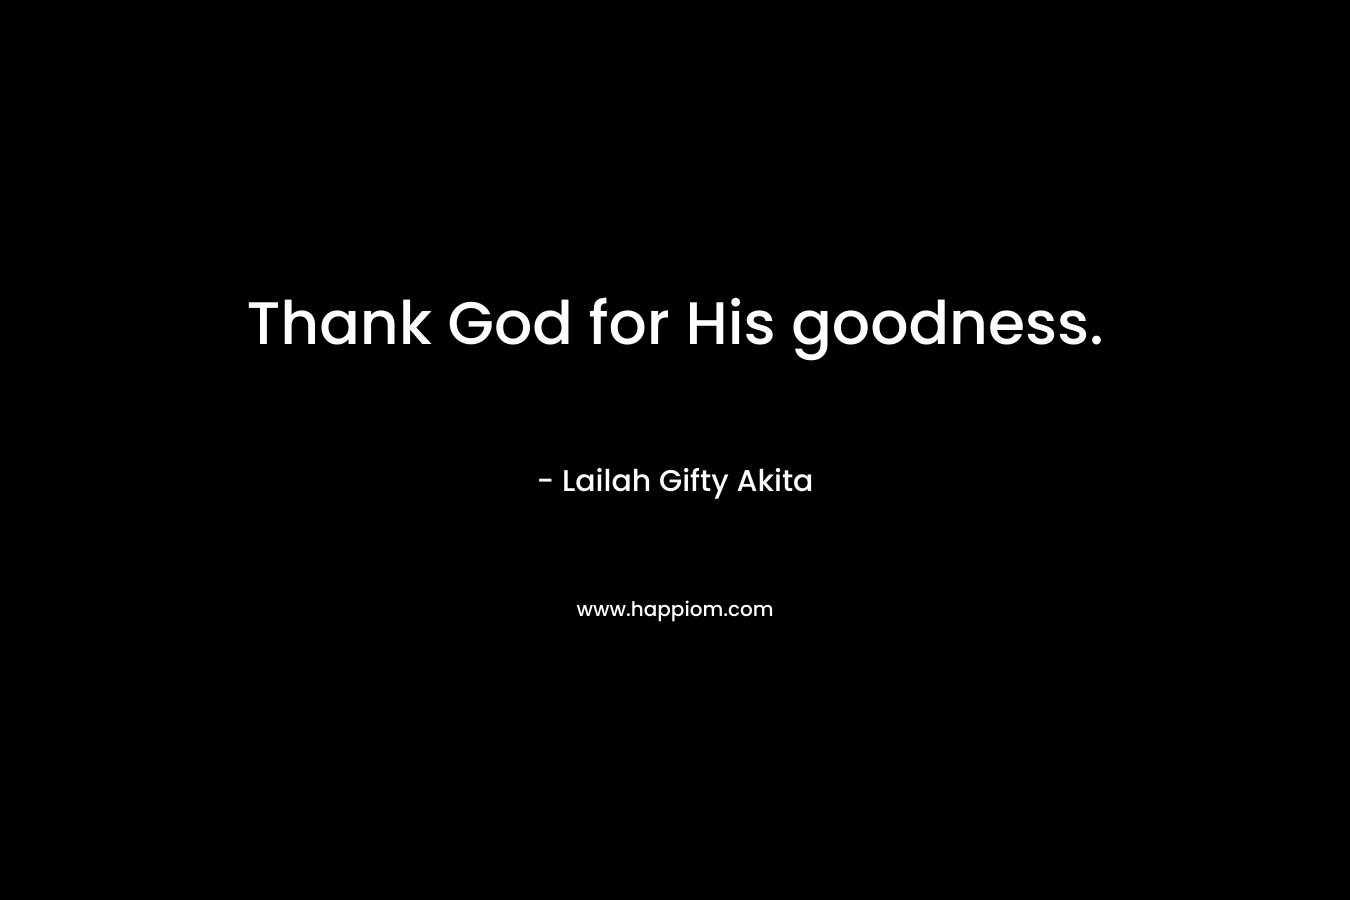 Thank God for His goodness.